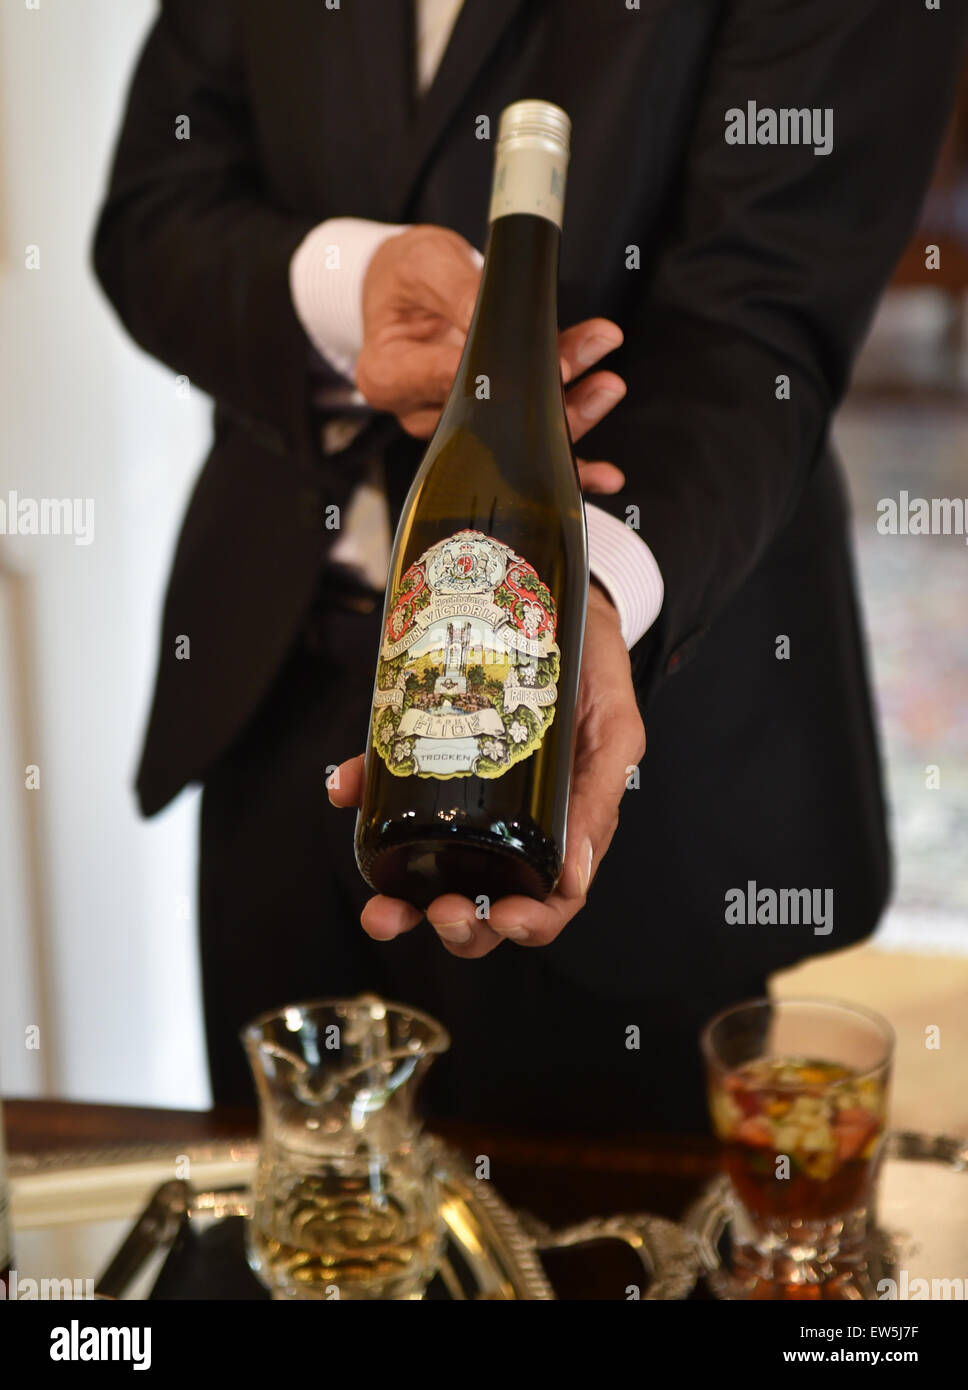 Riesling white wine 'Hochheimer Koenigin Victoria Berg', to be served at the ambassador's garden party in honor of the Queen on 25 June 2015, is presented in the residence of the British Ambassador during a press meeting in Berlin, Germany, 18 June 2015. Stock Photo